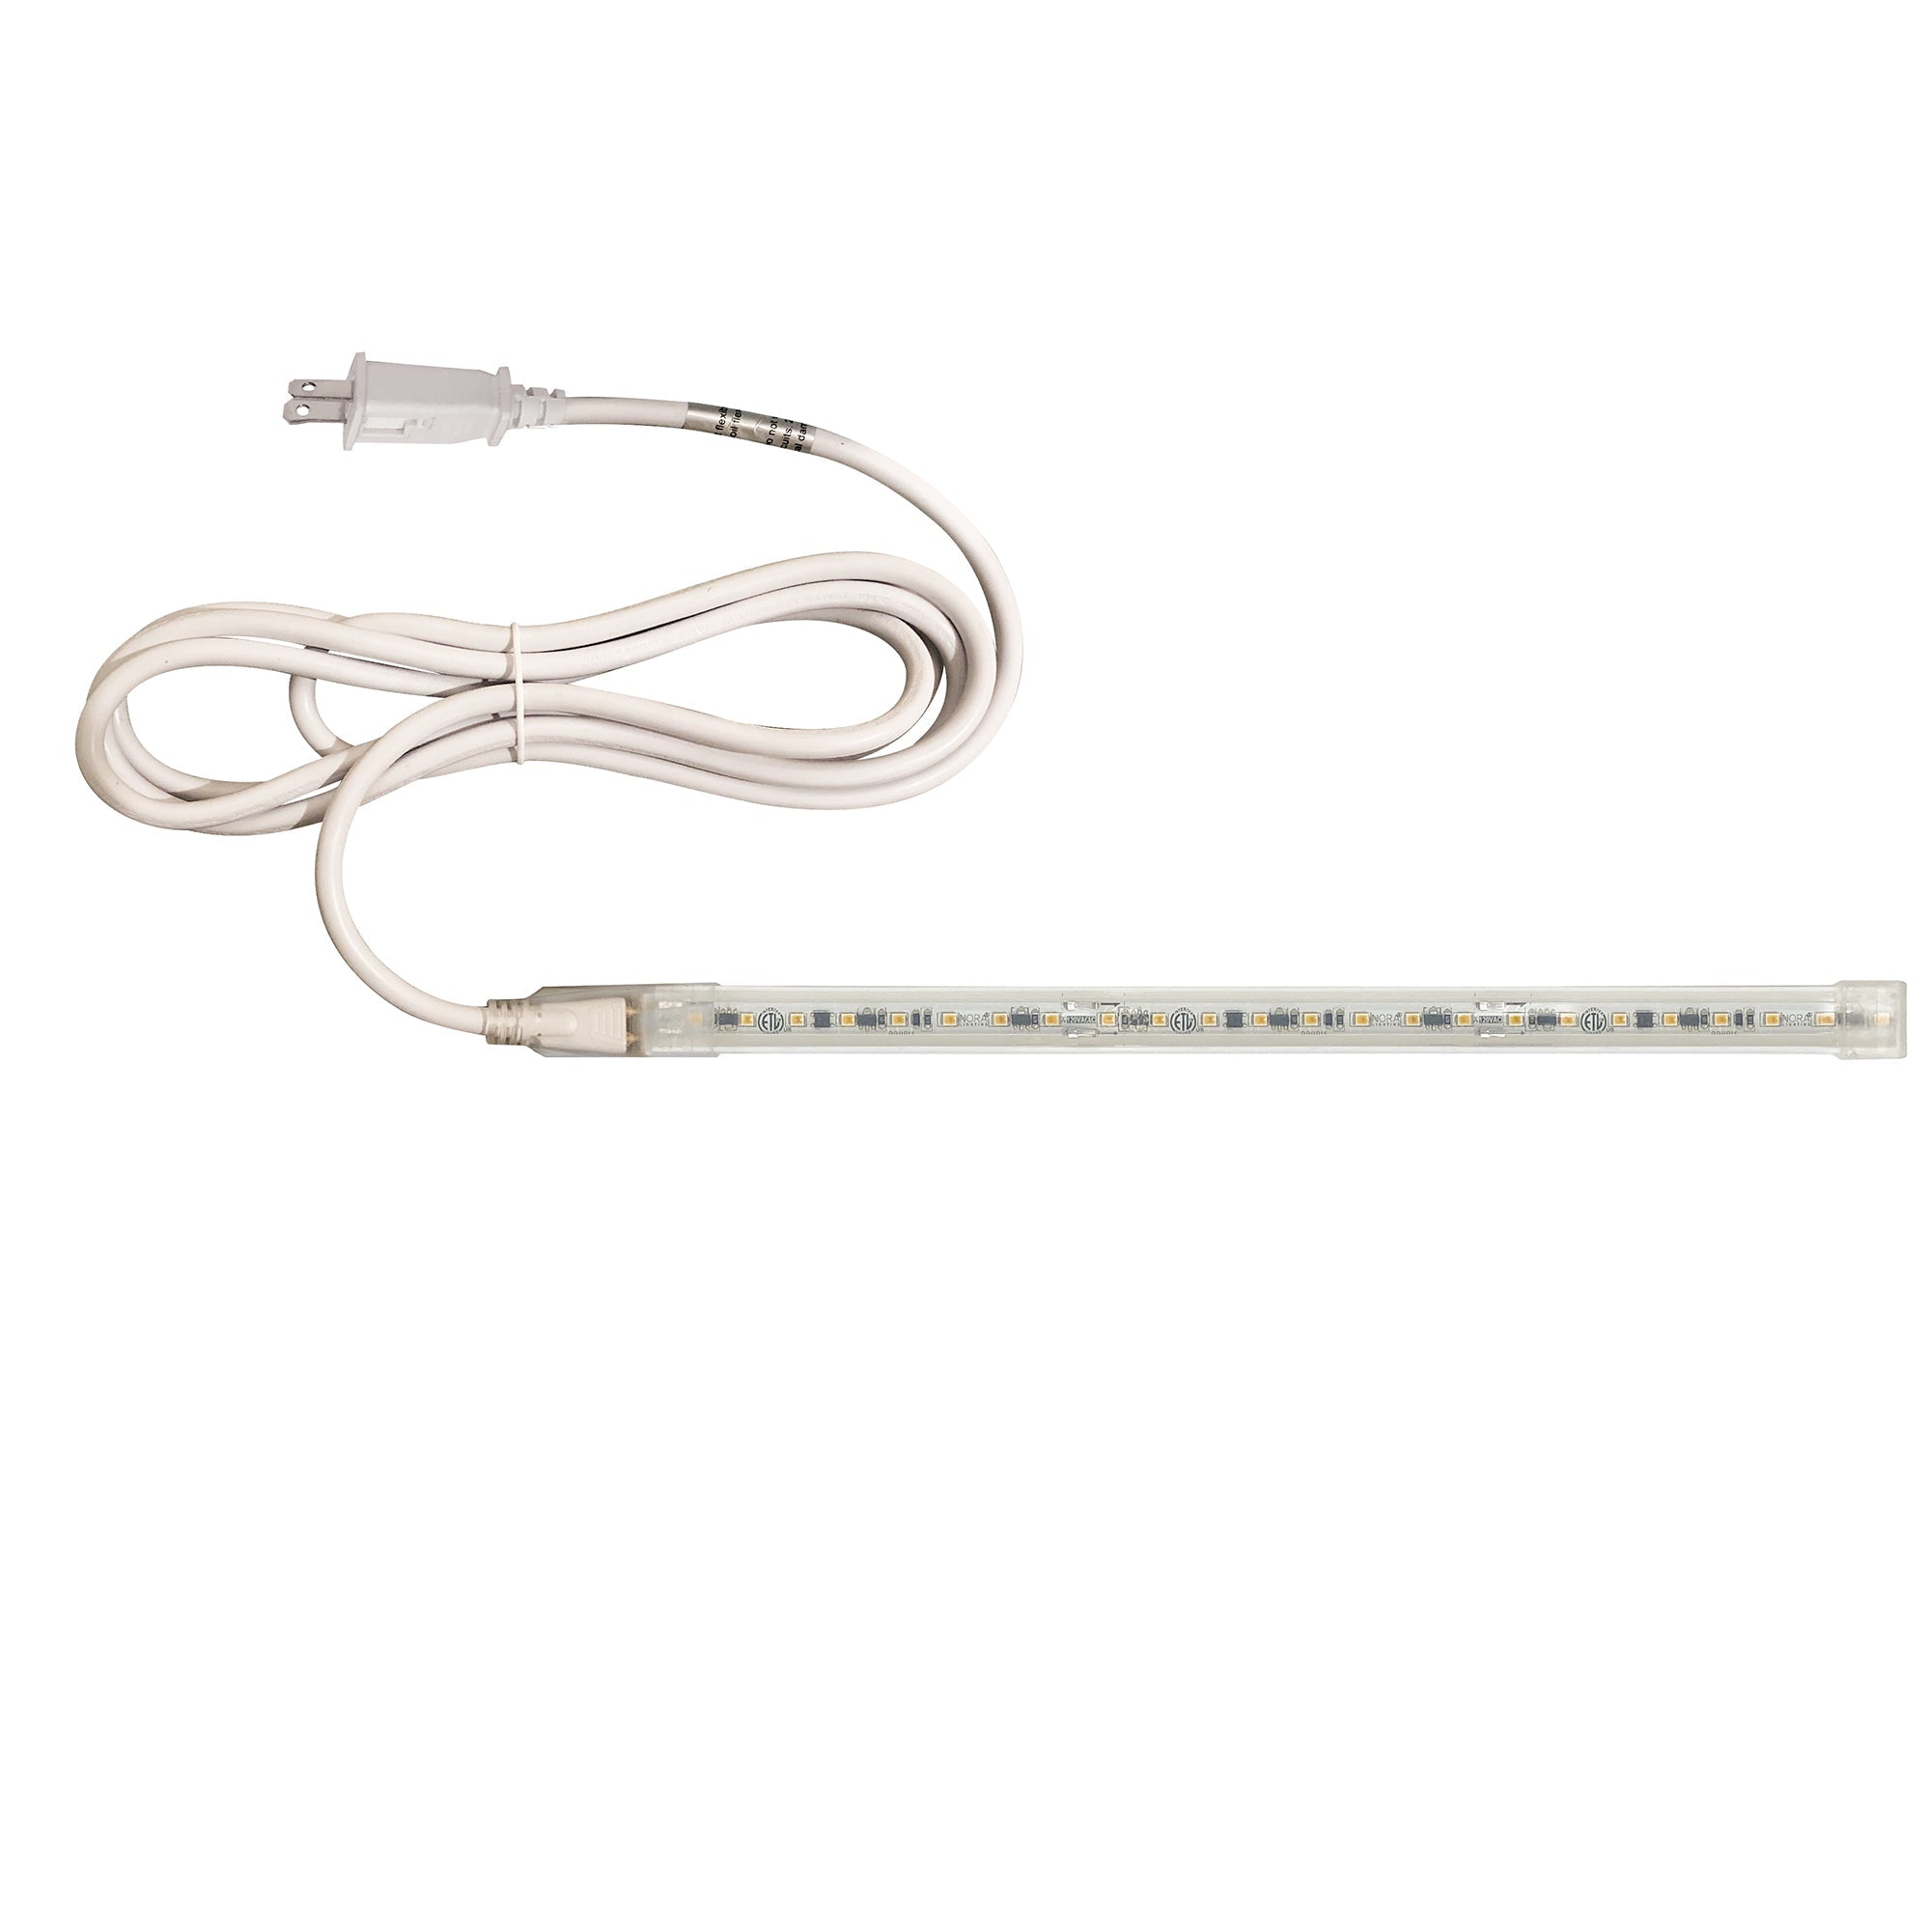 Nora Lighting NUTP13-W9-8-12-927/CP - Accent / Undercabinet - Custom Cut 9-ft, 8-in 120V Continuous LED Tape Light, 330lm / 3.6W per foot, 2700K, w/ Mounting Clips and 8' Cord & Plug